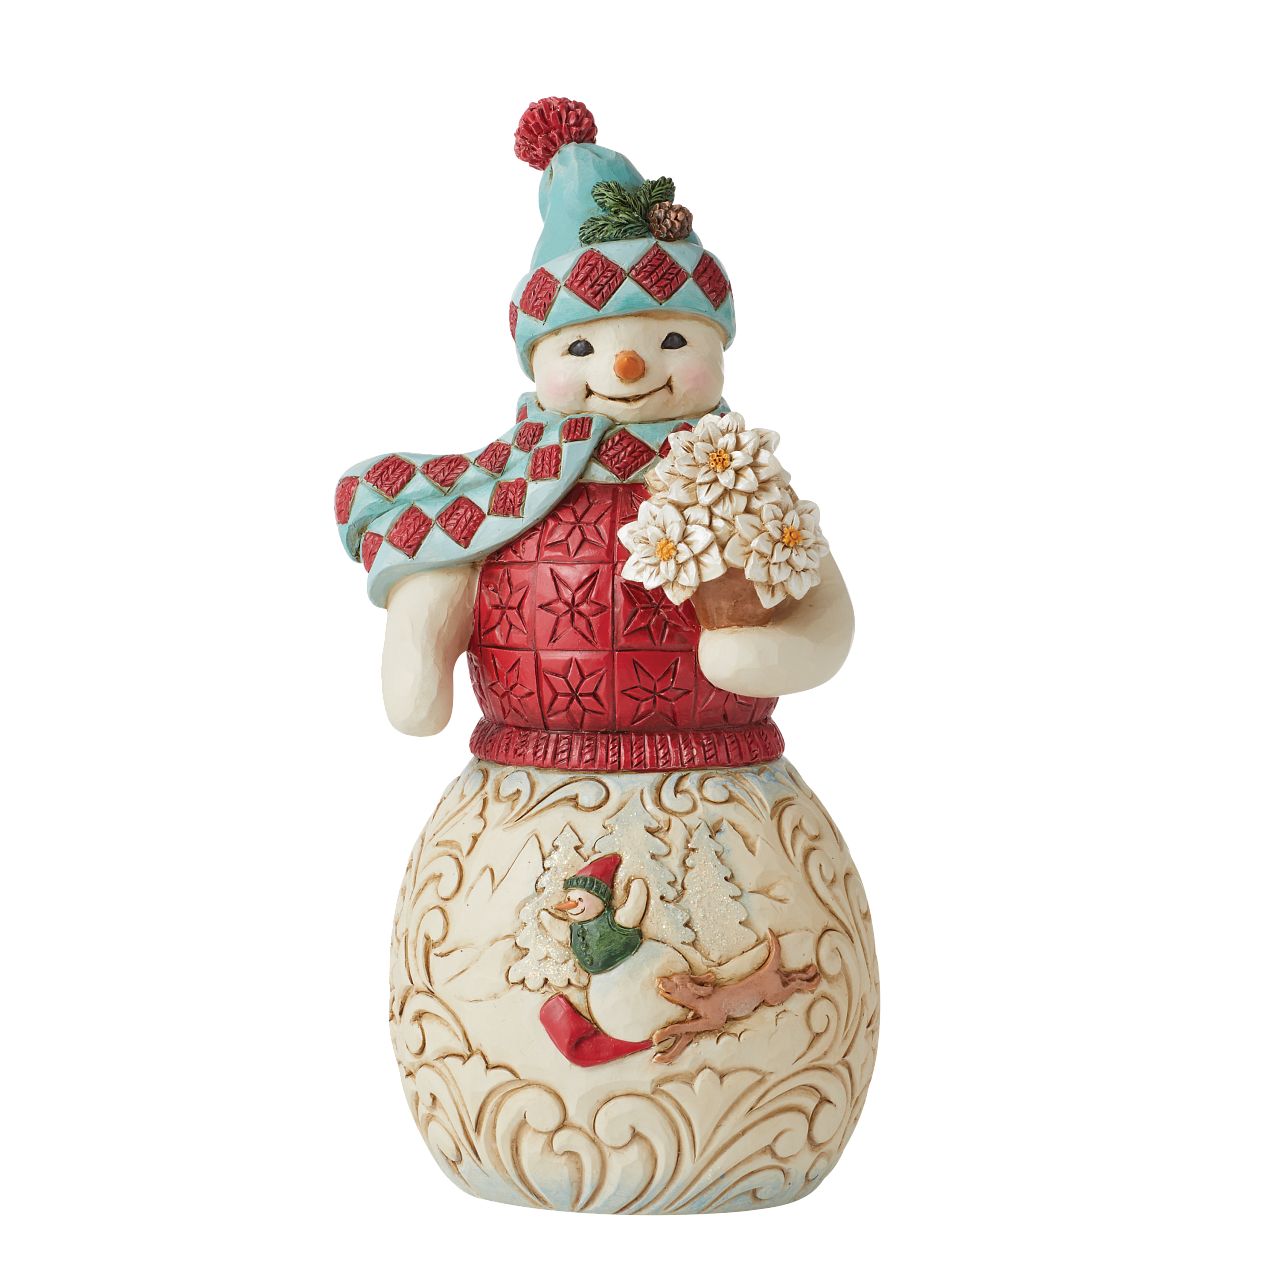 Winter Wonderland Collection Snowman with Sledding Scene Figurine  Winter Wonderland Collection; Bright jewel tones, metallic shimmering and pearlized finishes and coloured glitter accents. This beautiful glittering Snowman has a delightful scene on his belly and will brighten any room.